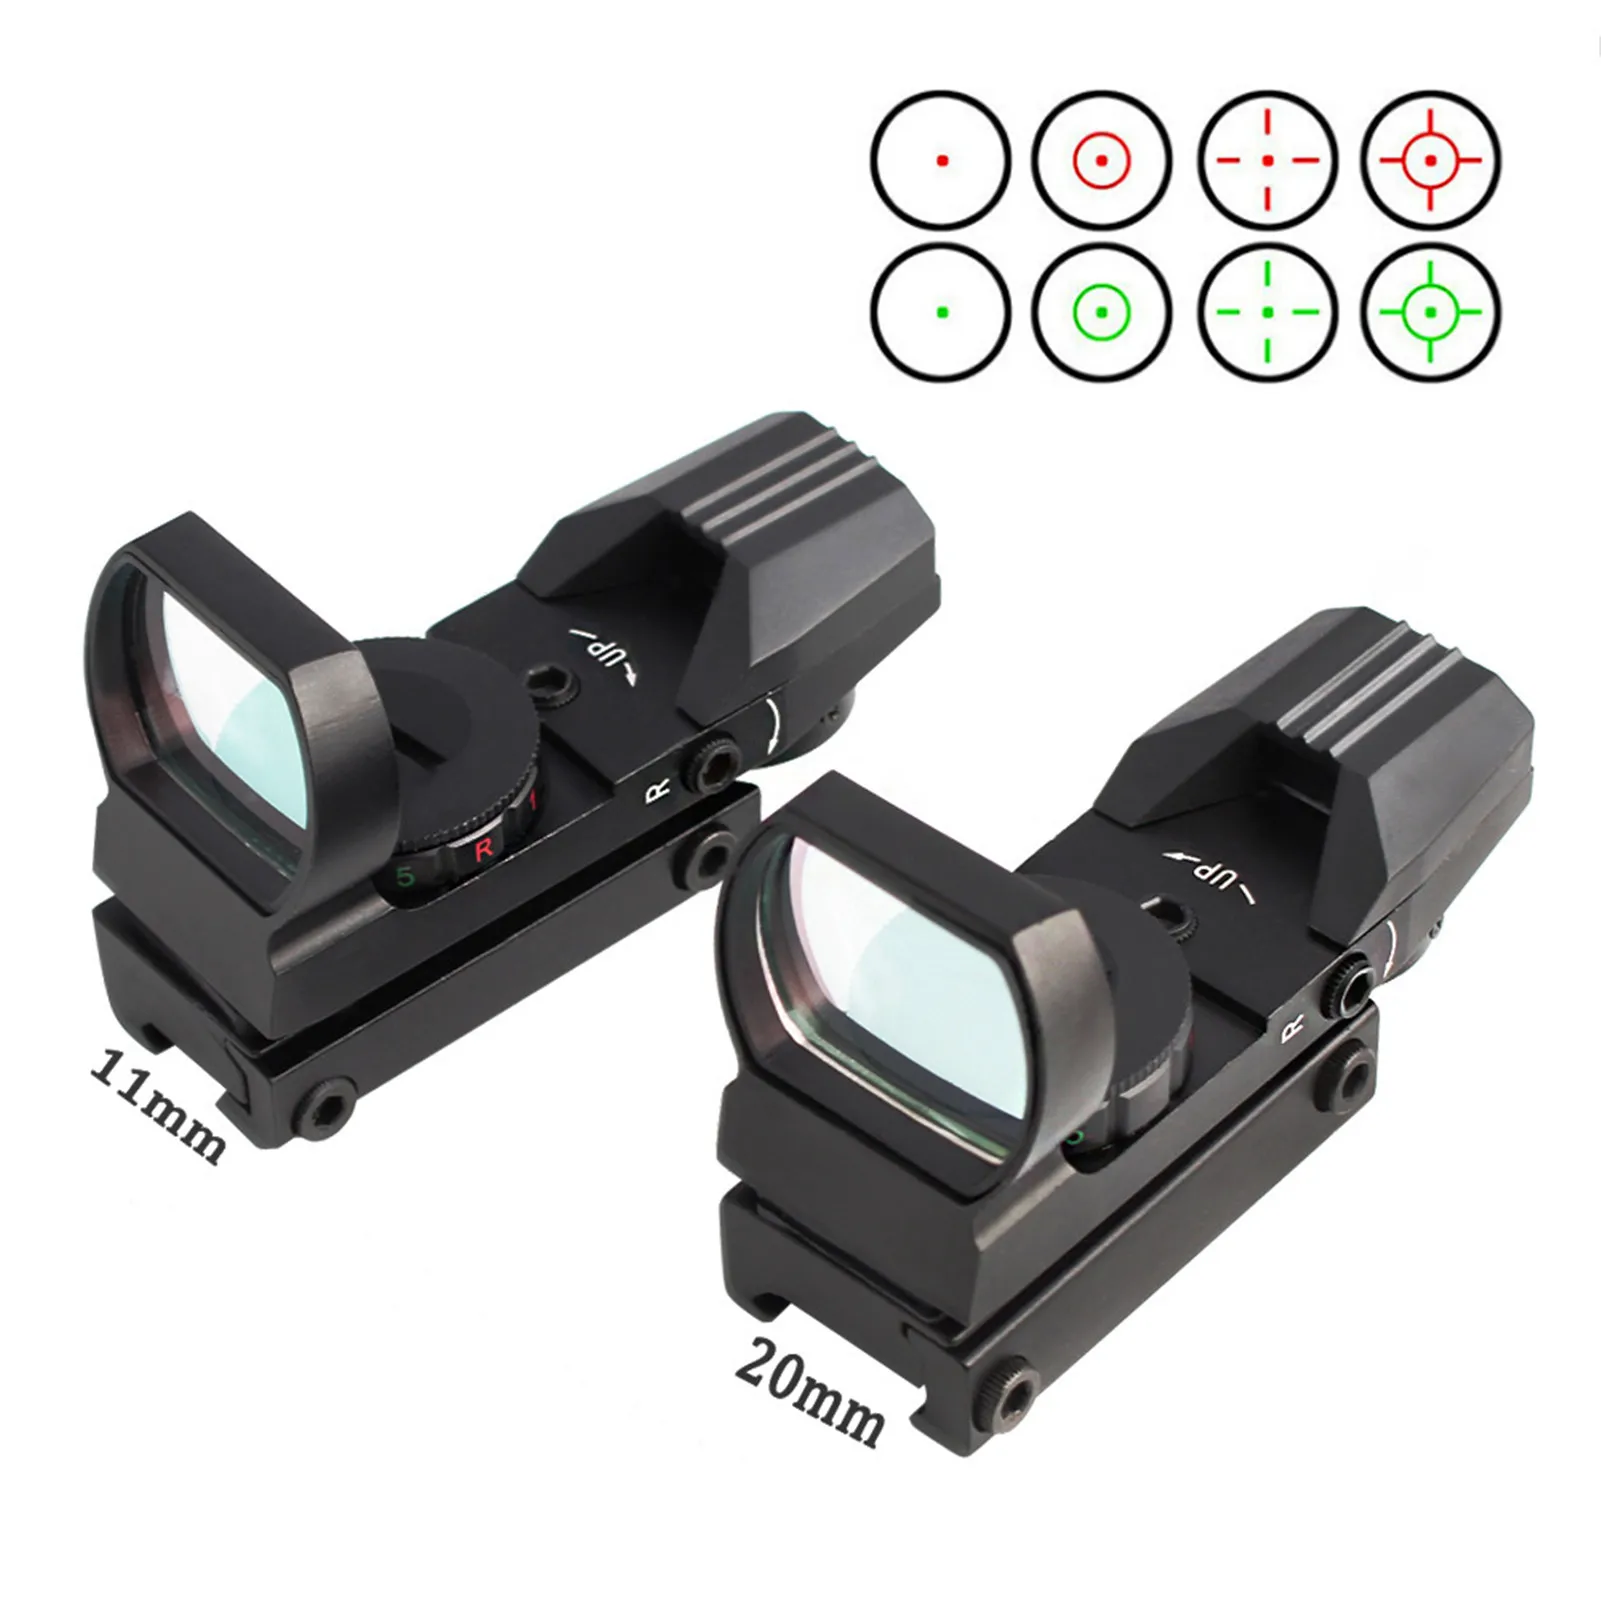 

Sight Scope Waterproof Shockproof Viewfinder Four Kinds of Variable Point Holographic Mirrors Adjustable Anti-glare for HD